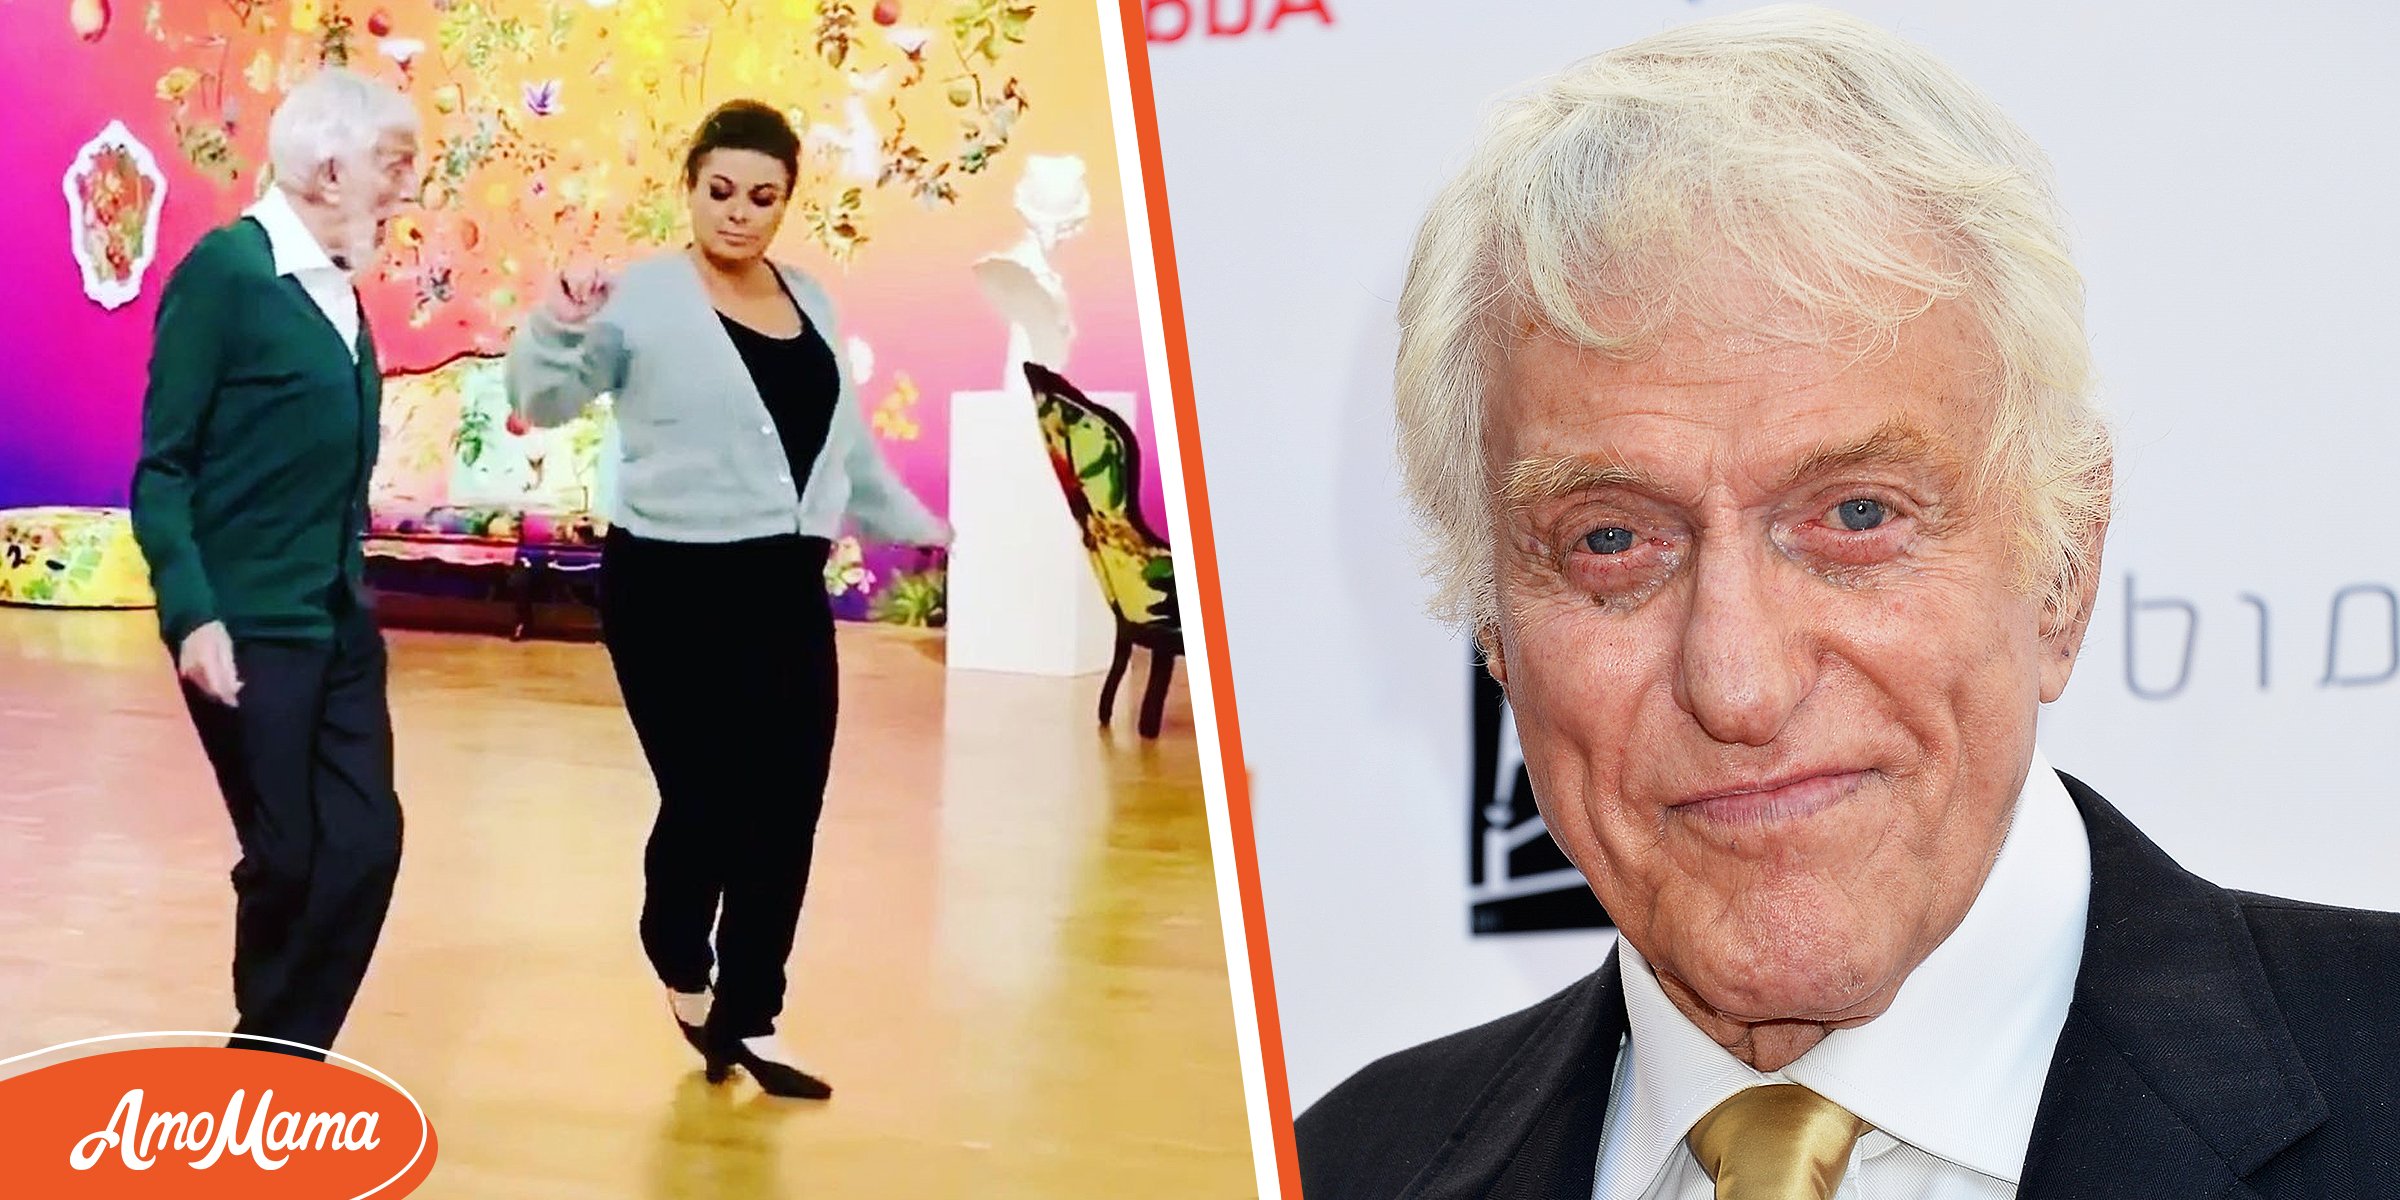 Dick Van Dyke Feared Fans Would Think Wife Was a ‘Gold Digger’ – He Enjoys Singing & Dancing with Her at Home